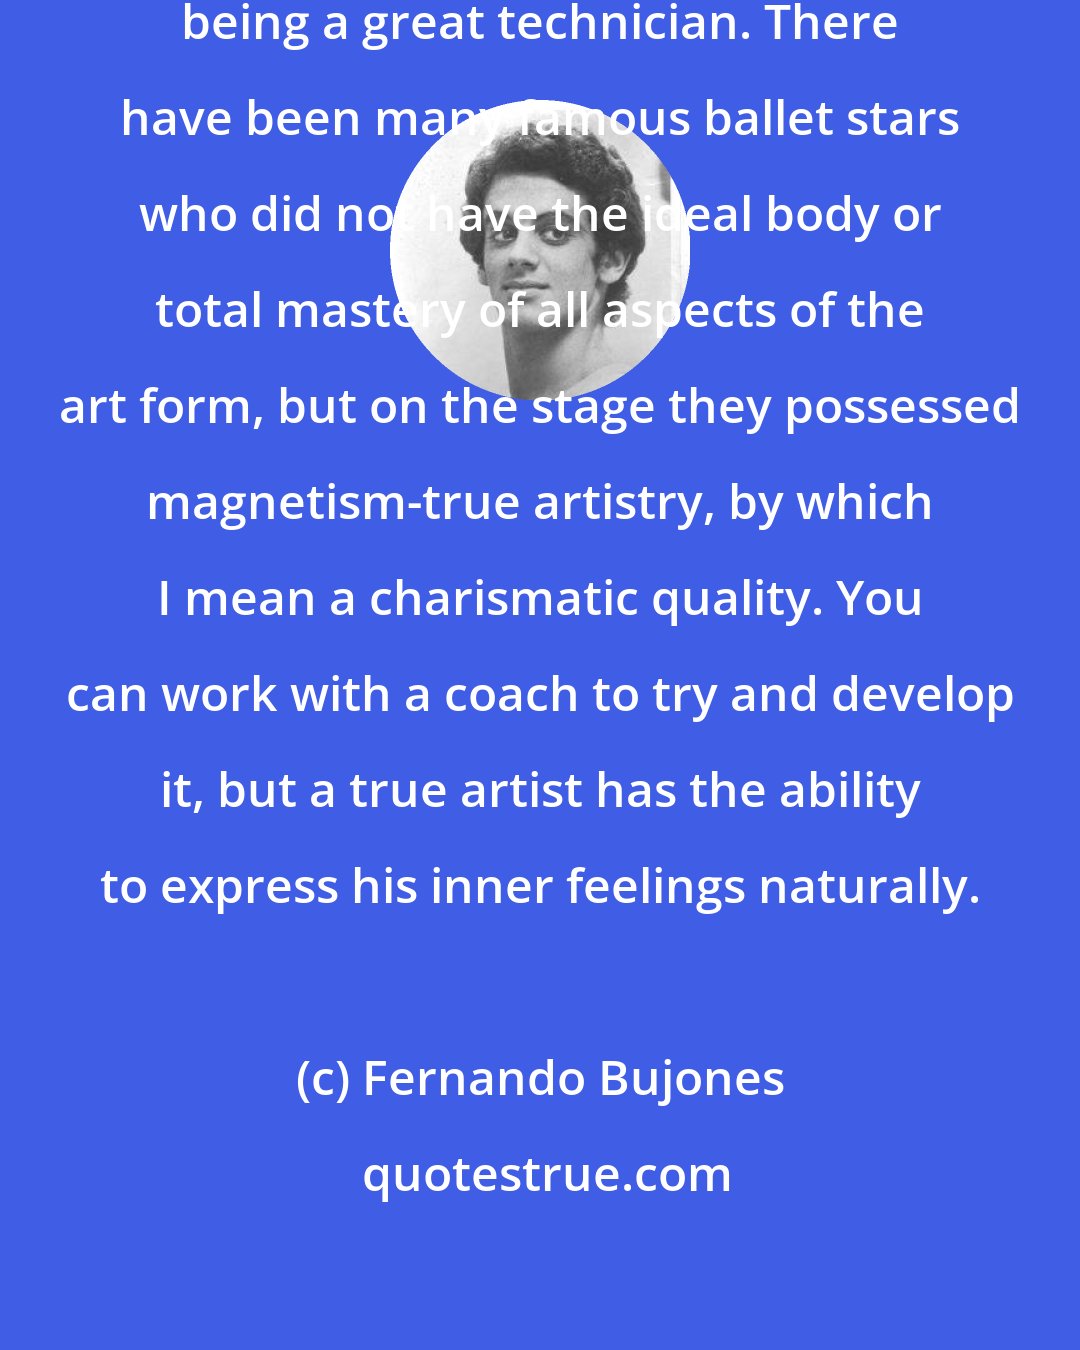 Fernando Bujones: One can be a great artist without being a great technician. There have been many famous ballet stars who did not have the ideal body or total mastery of all aspects of the art form, but on the stage they possessed magnetism-true artistry, by which I mean a charismatic quality. You can work with a coach to try and develop it, but a true artist has the ability to express his inner feelings naturally.